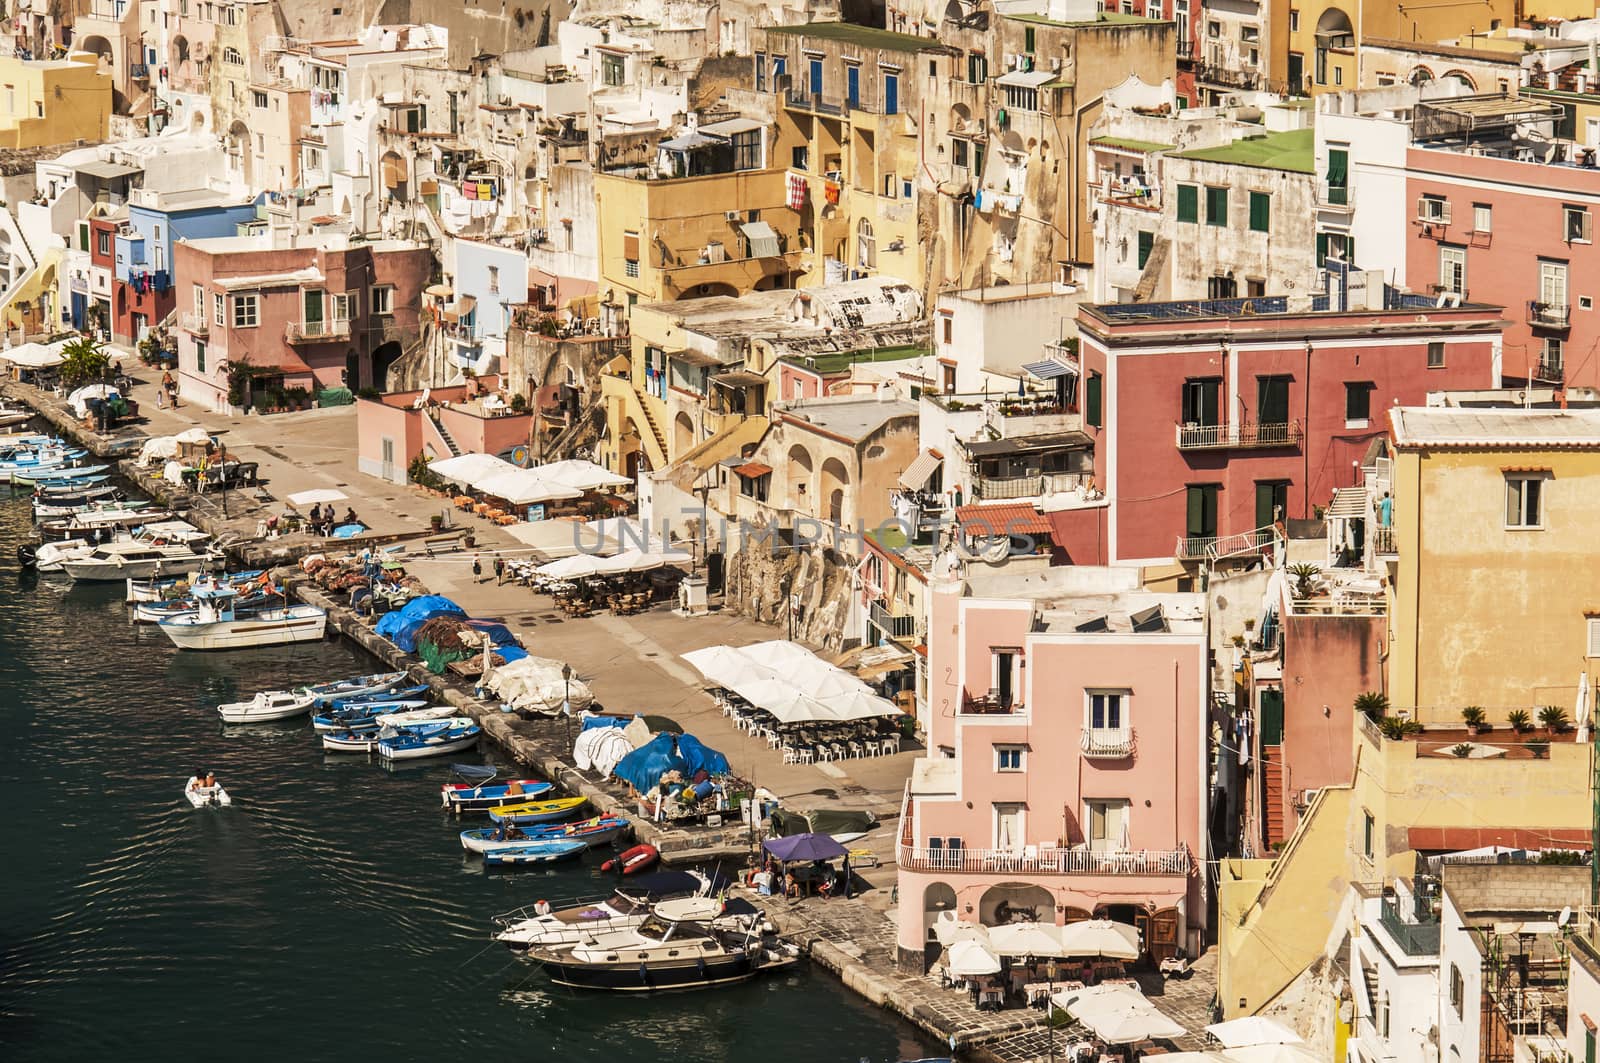 view of the harbour and the colored buildings in Procida, Naples